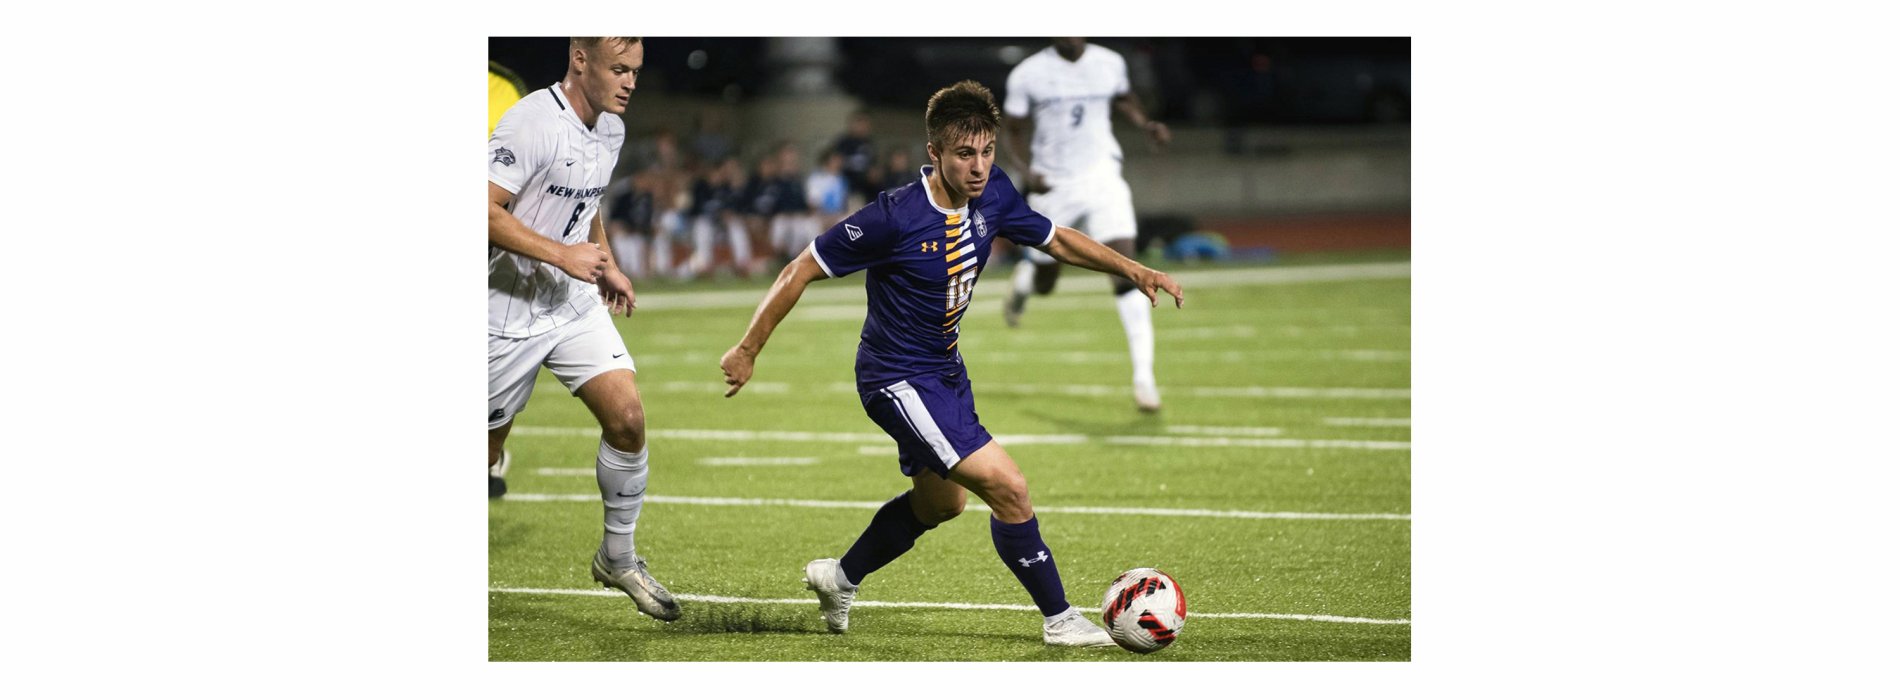 UAlbany's Giuliano Lucca dribbles the ball.